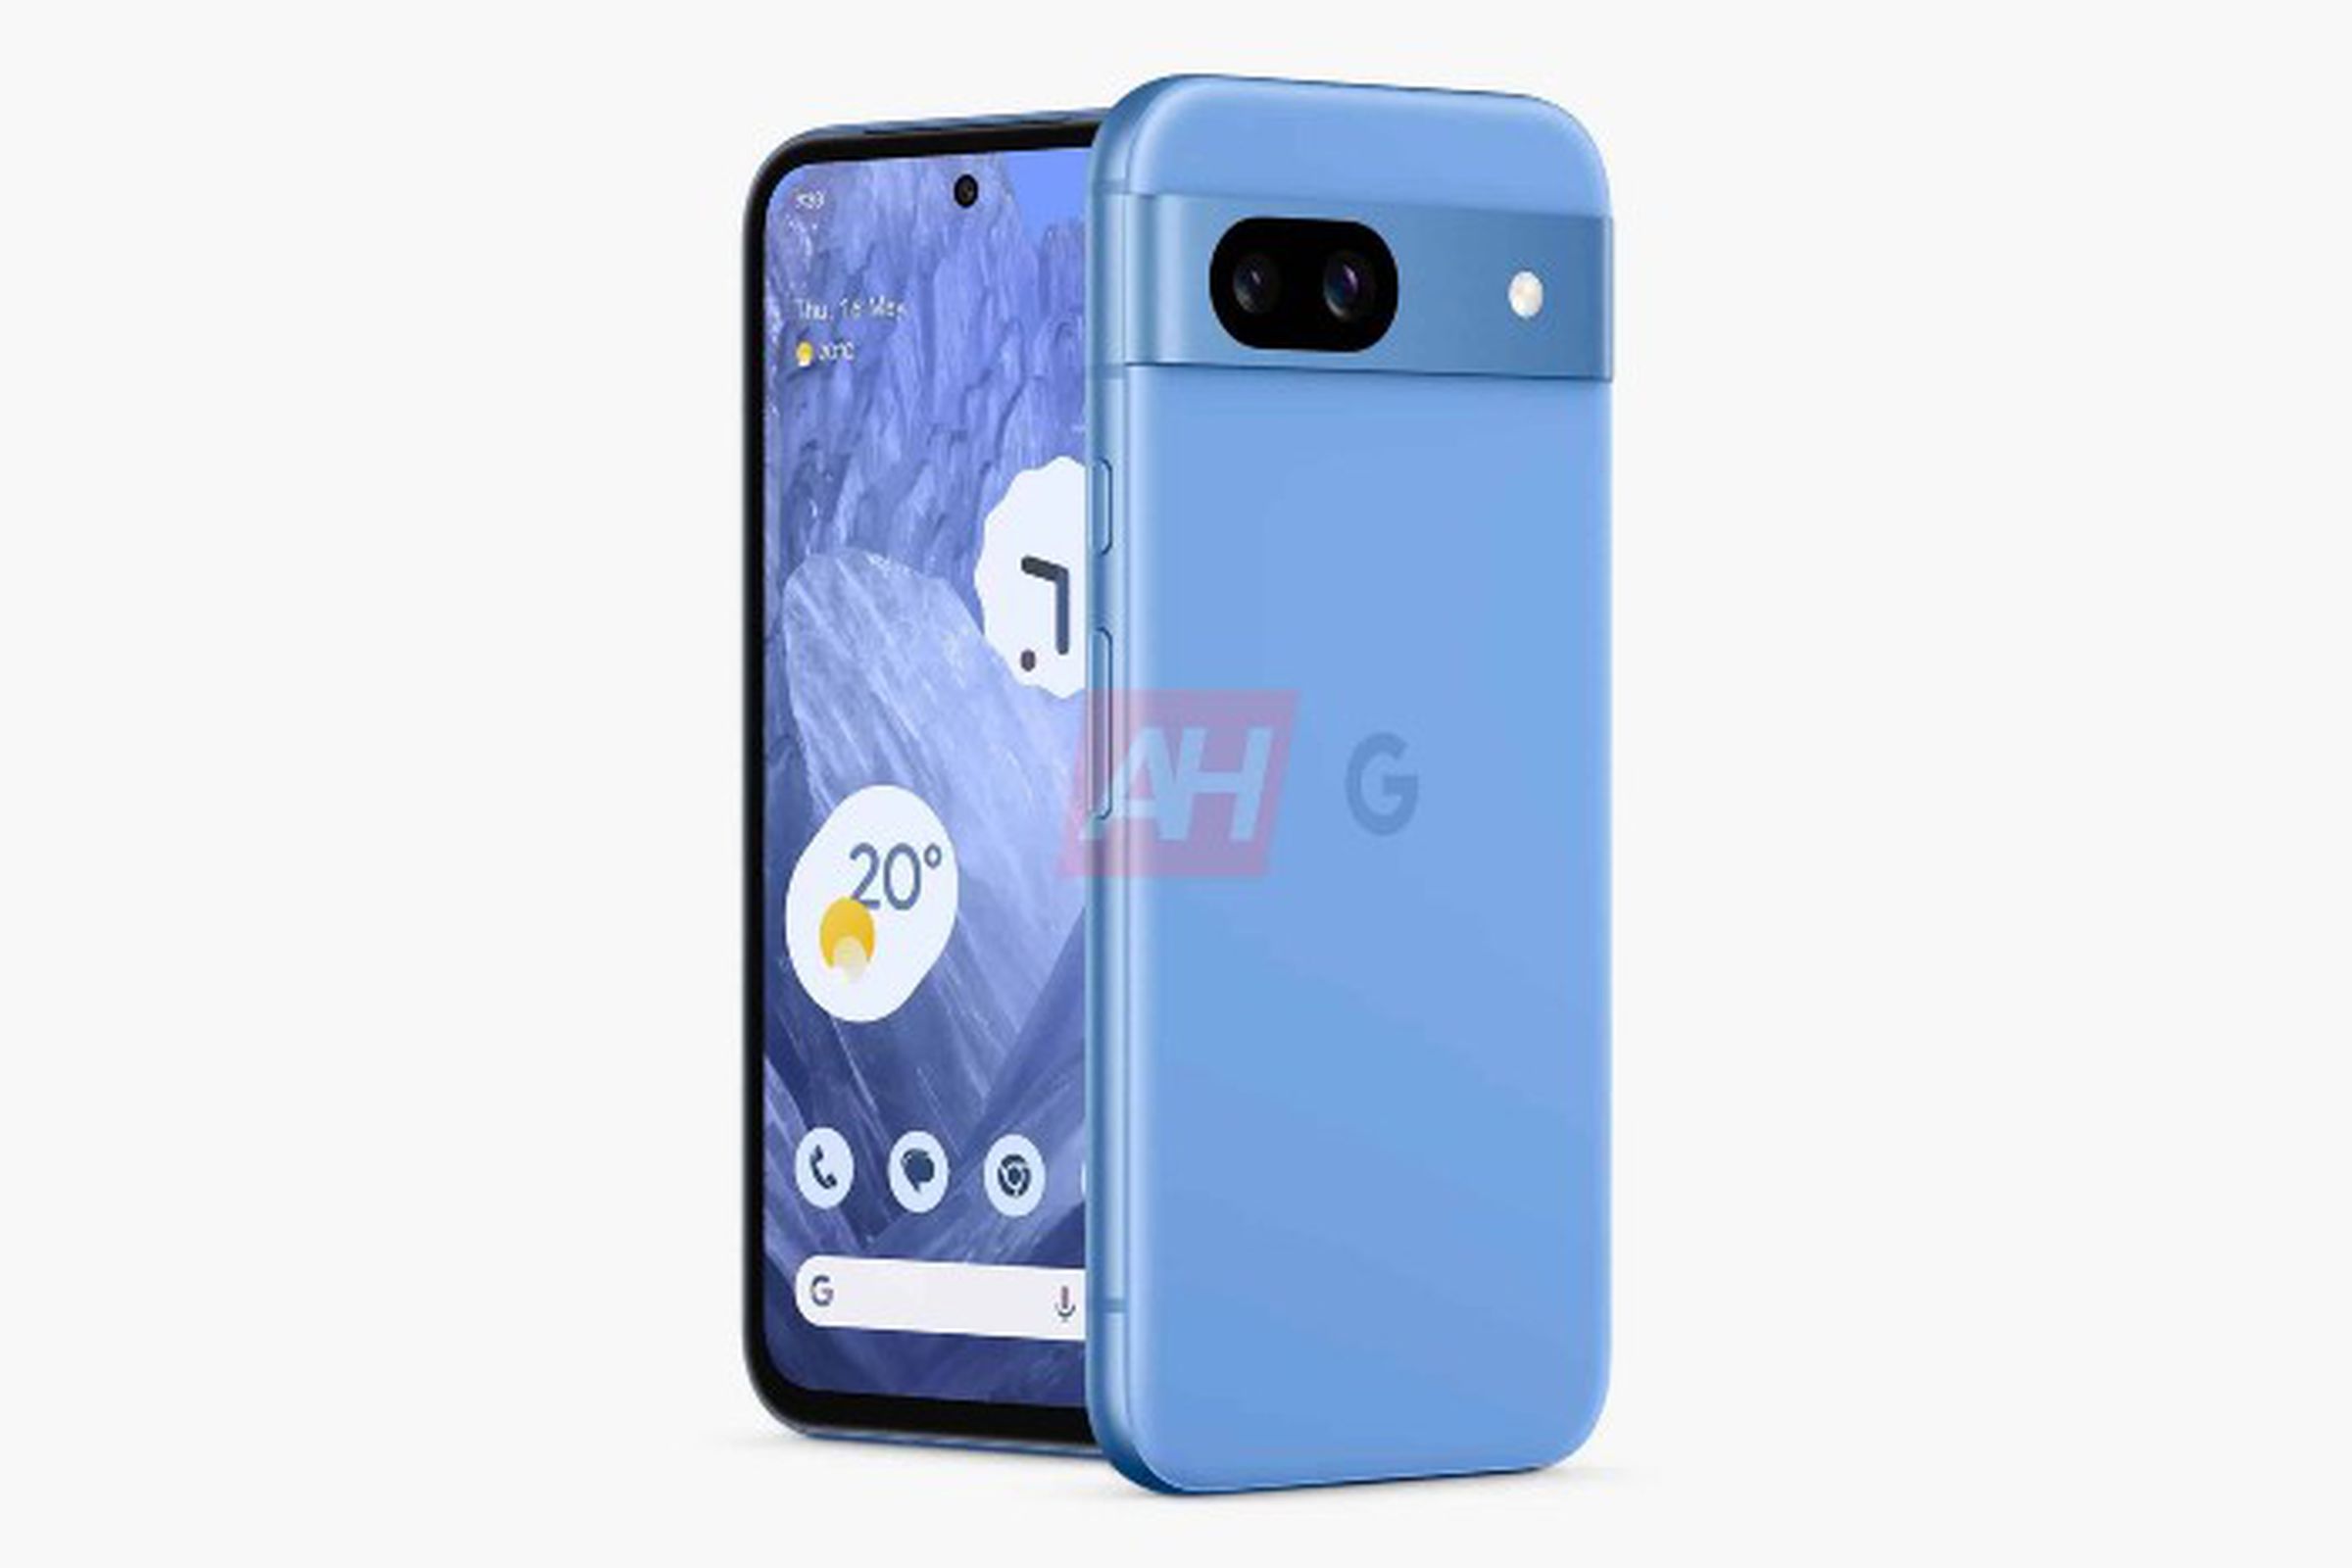 A leaked image showing the Google Pixel 8A